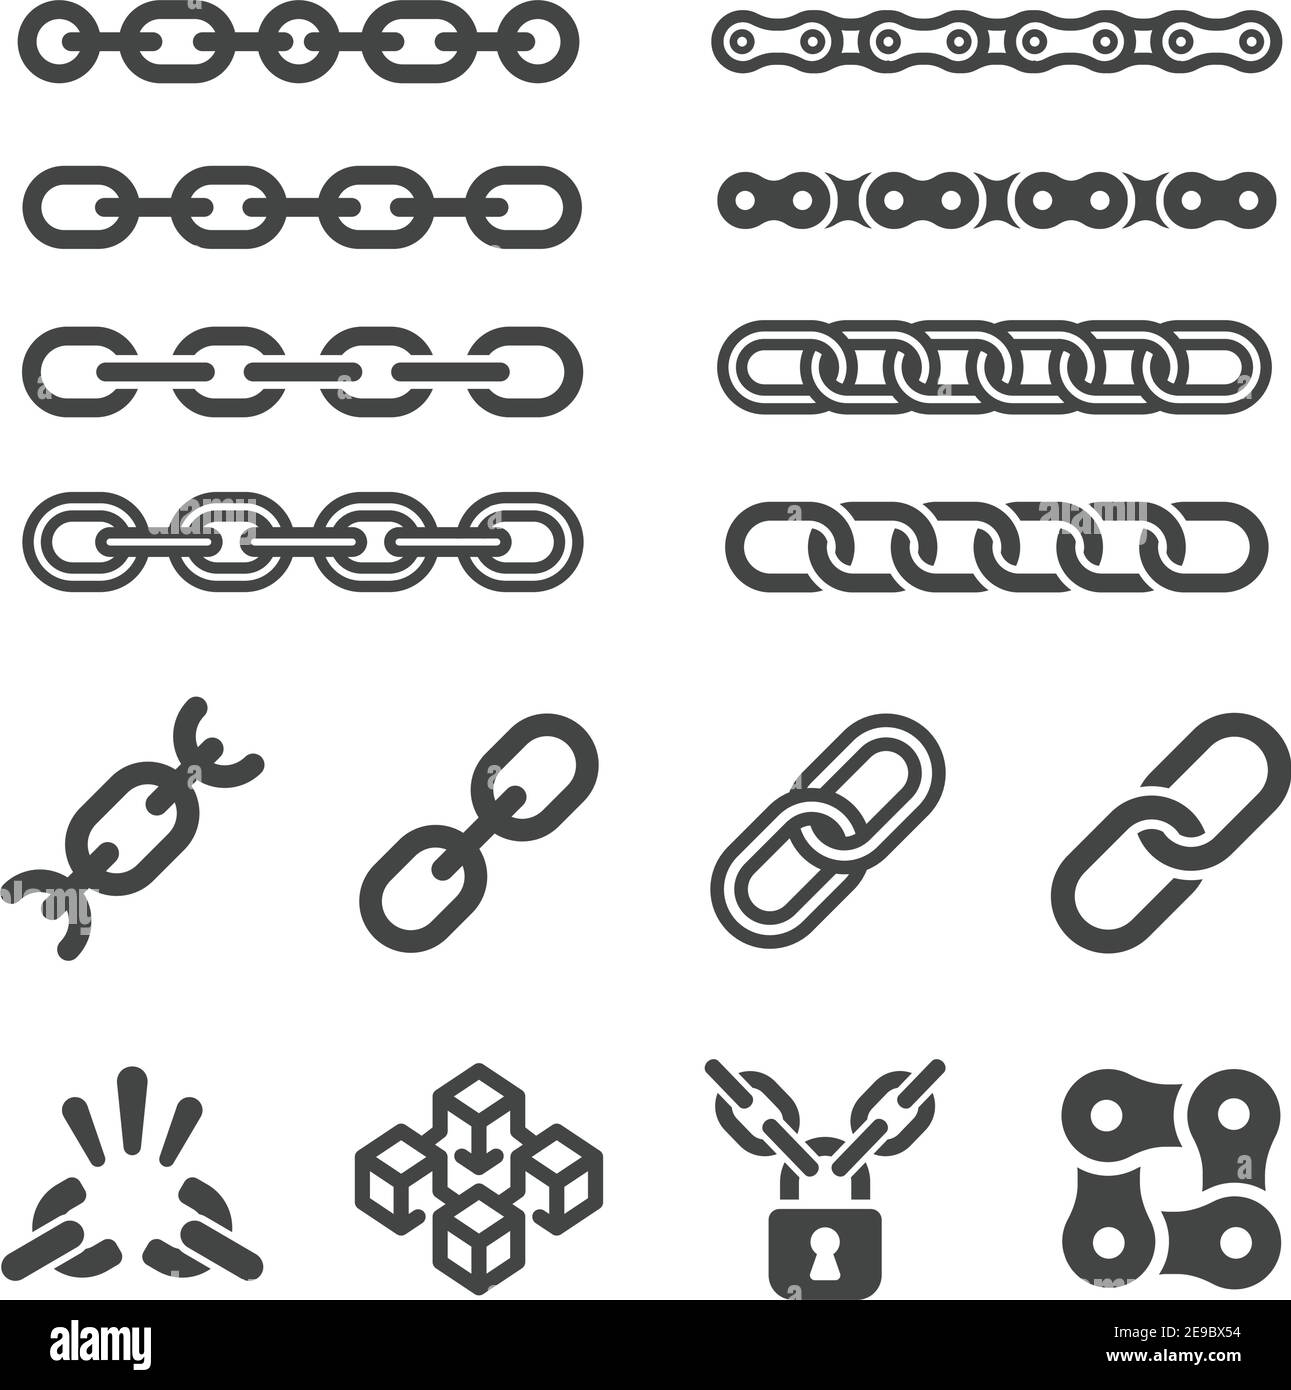 chain and link icon set,vector and illstration Stock Vector